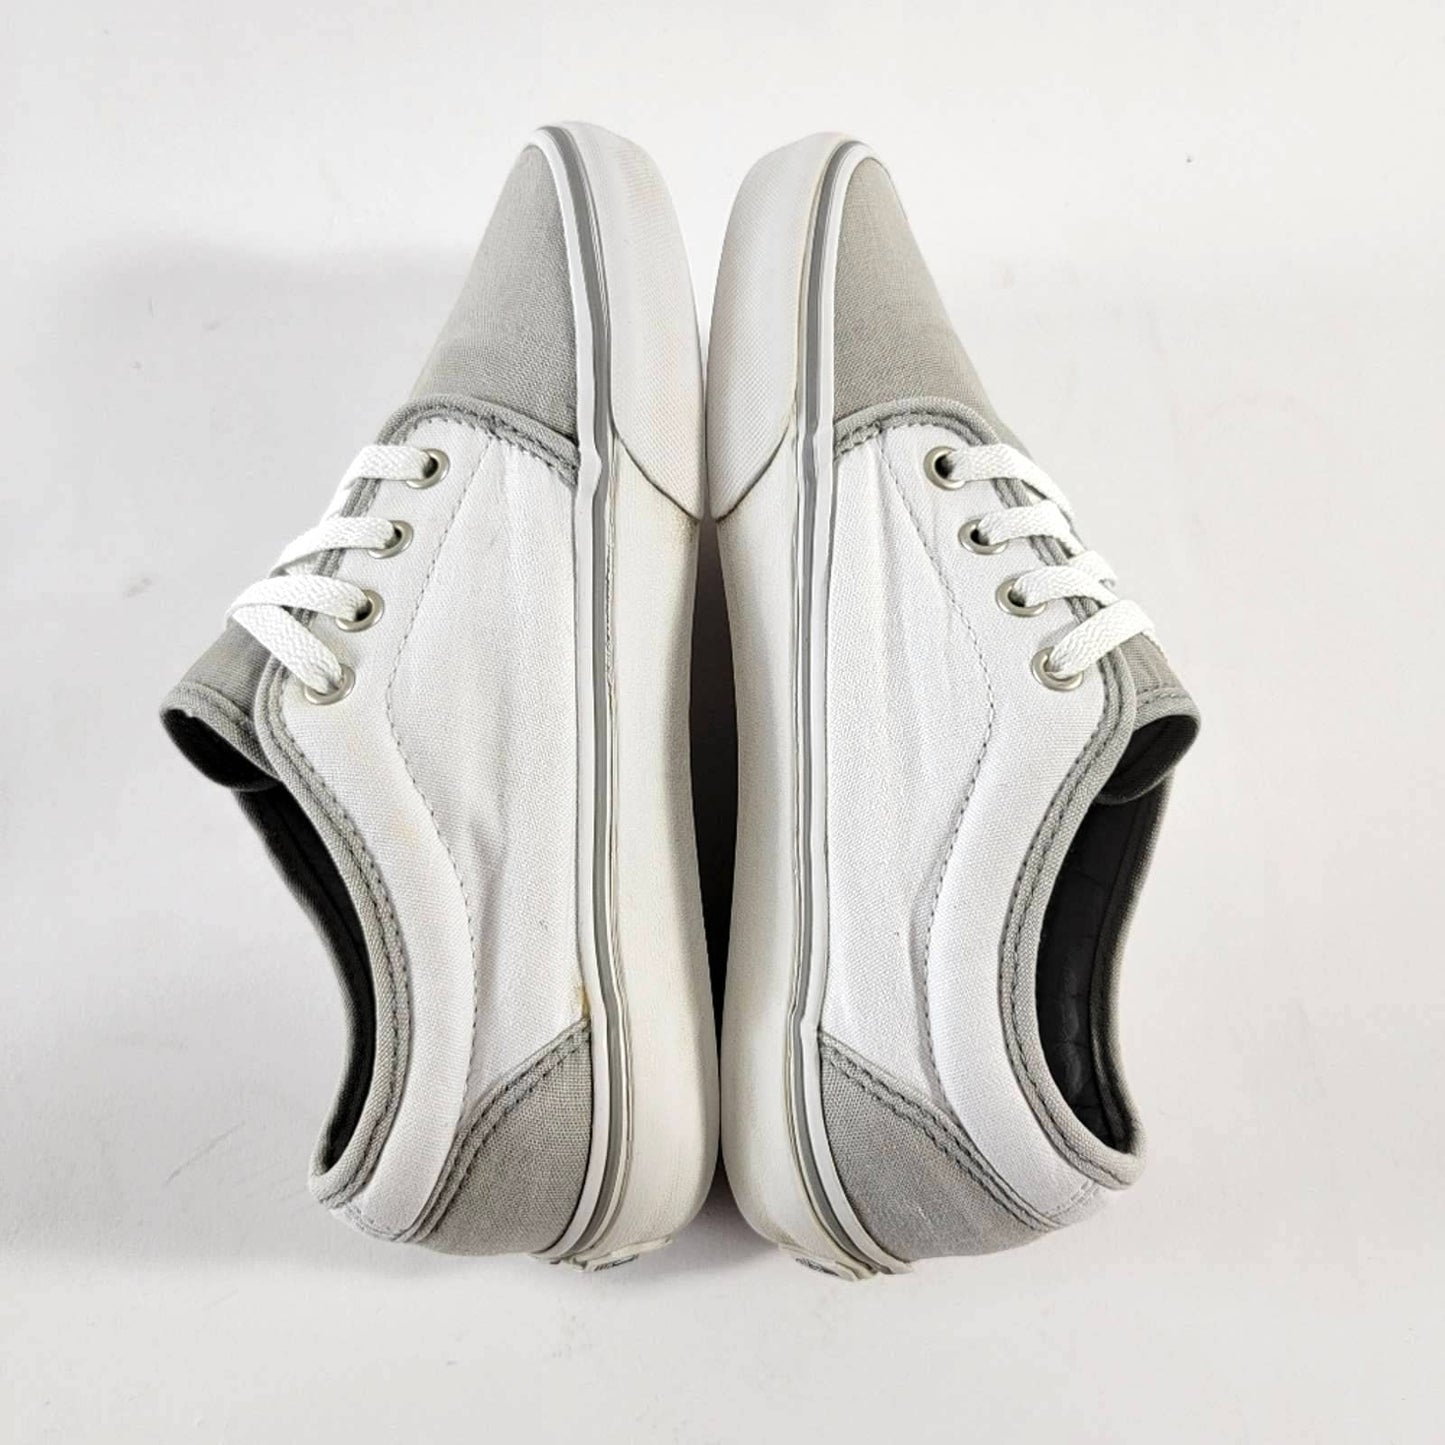 Vans Atwood Classic Two Tone Low Top Sneakers - 7.5